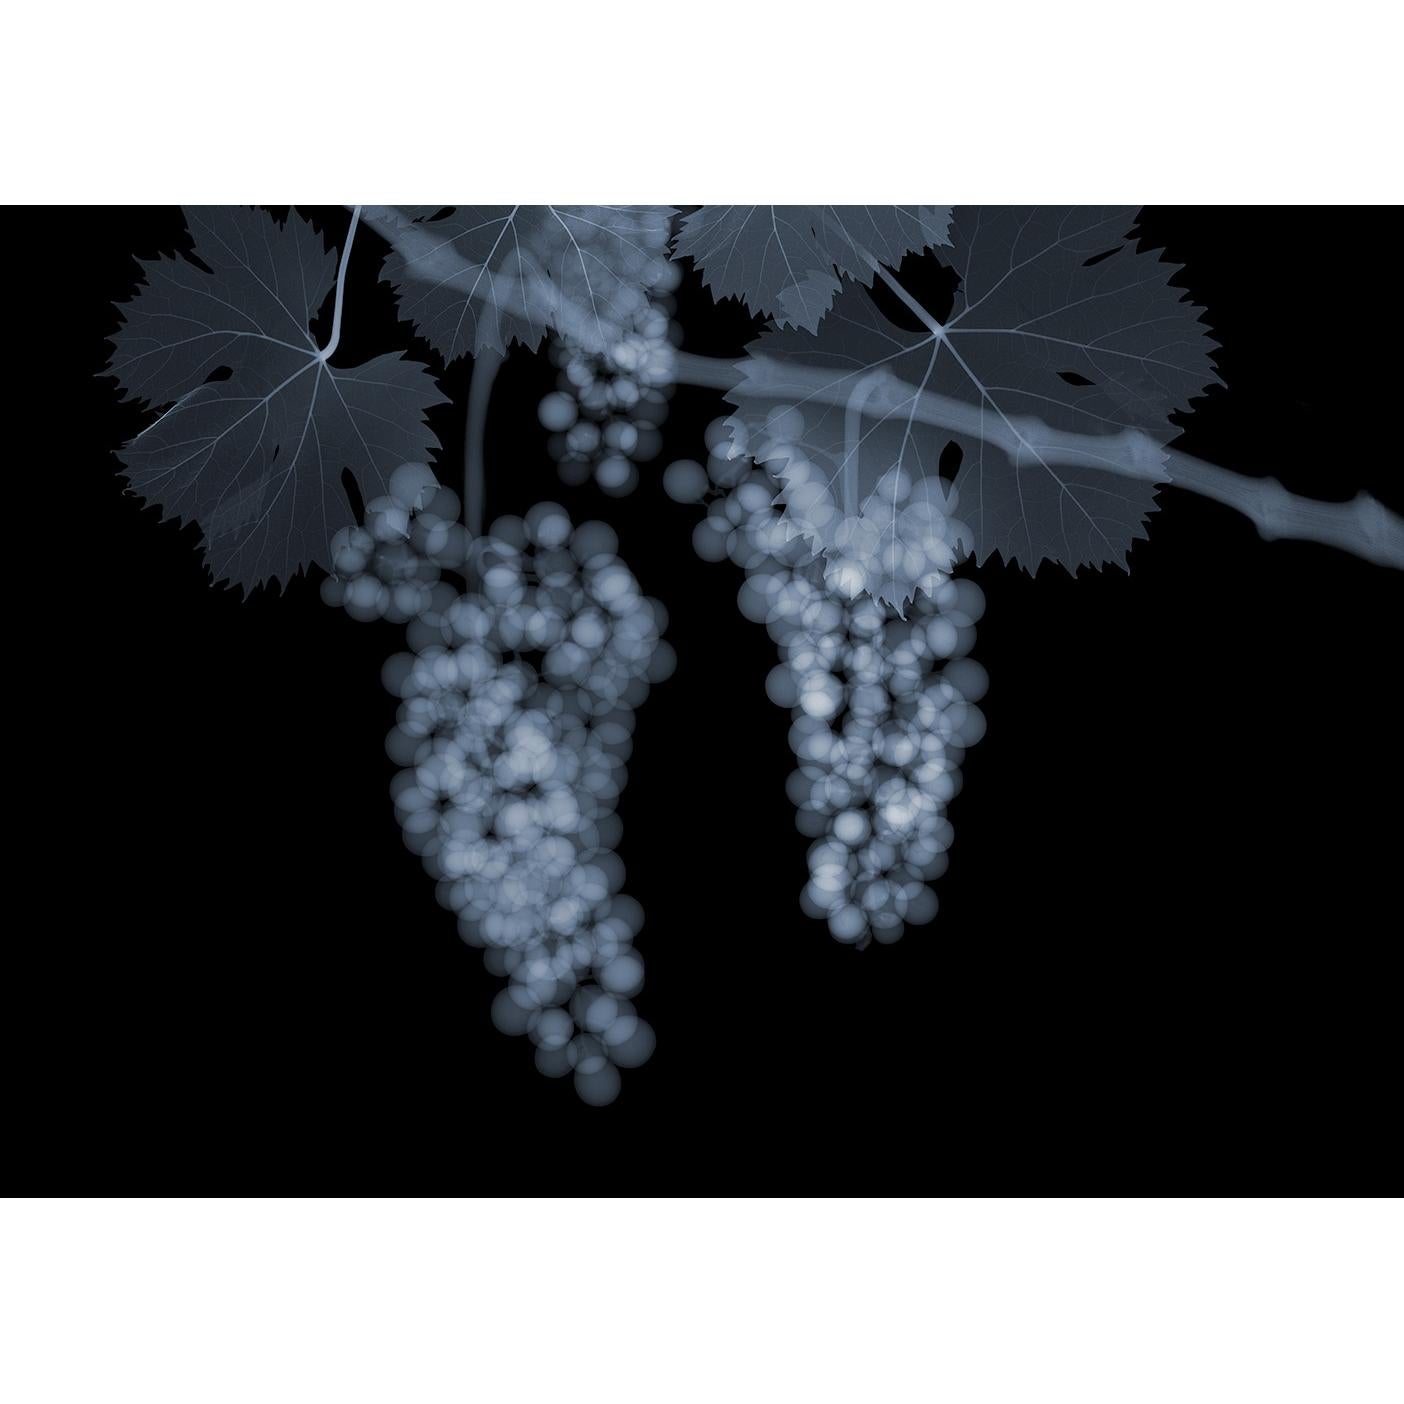 Grapes on the Vine, Ed 9 - Mixed Media Art by Nick Veasey